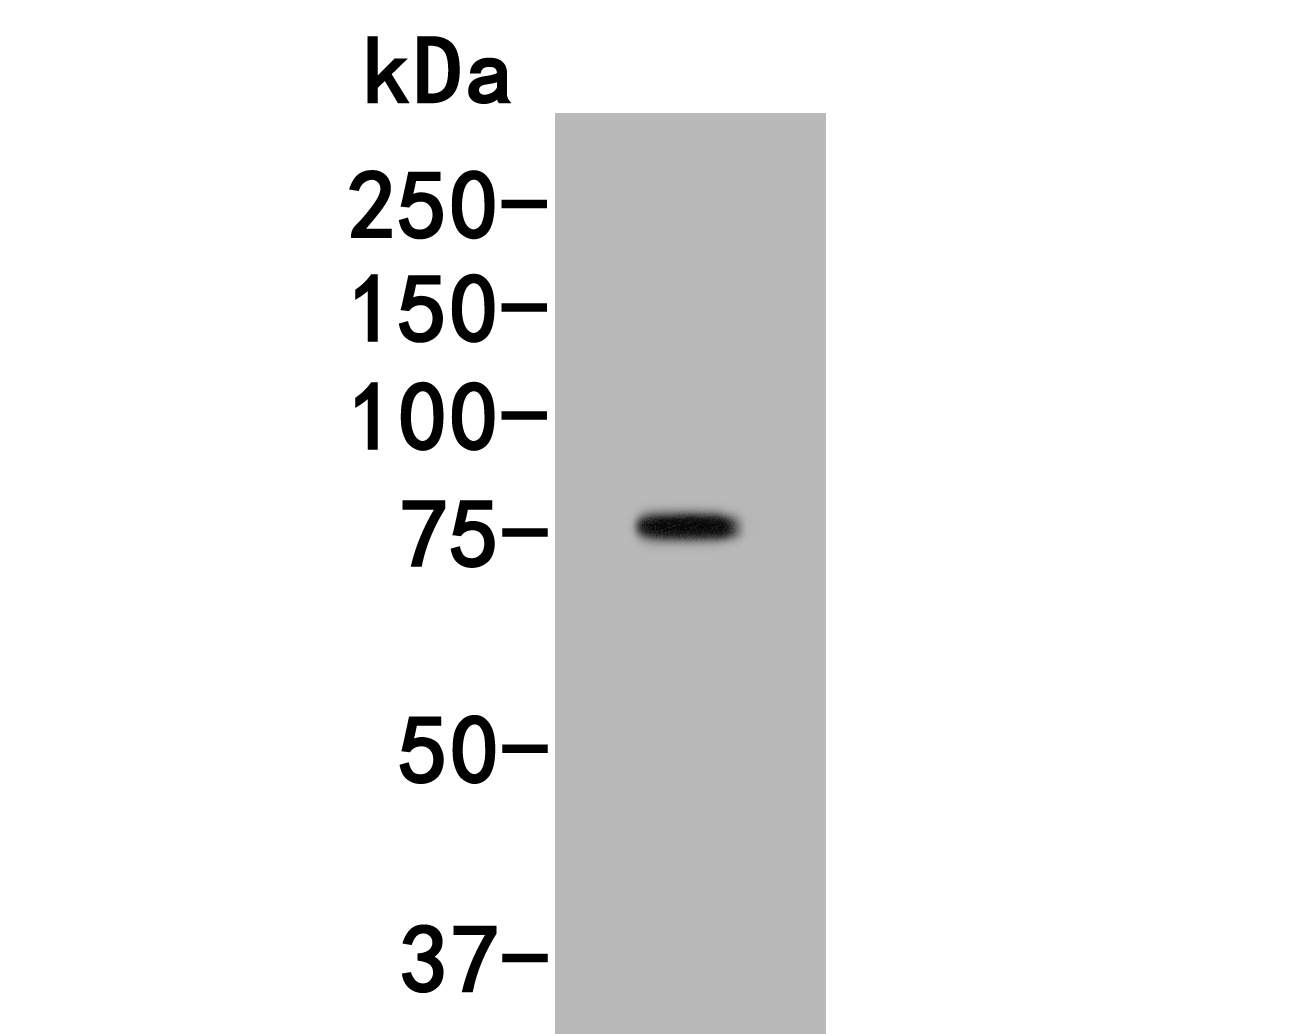 Western blot analysis of SLC44A4 on HepG2 lysates. Proteins were transferred to a PVDF membrane and blocked with 5% BSA in PBS for 1 hour at room temperature. The primary antibody (HA600017, 1/500) was used in 5% BSA at room temperature for 2 hours. Goat Anti-Mouse IgG - HRP Secondary Antibody (HA1006) at 1:5,000 dilution was used for 1 hour at room temperatur